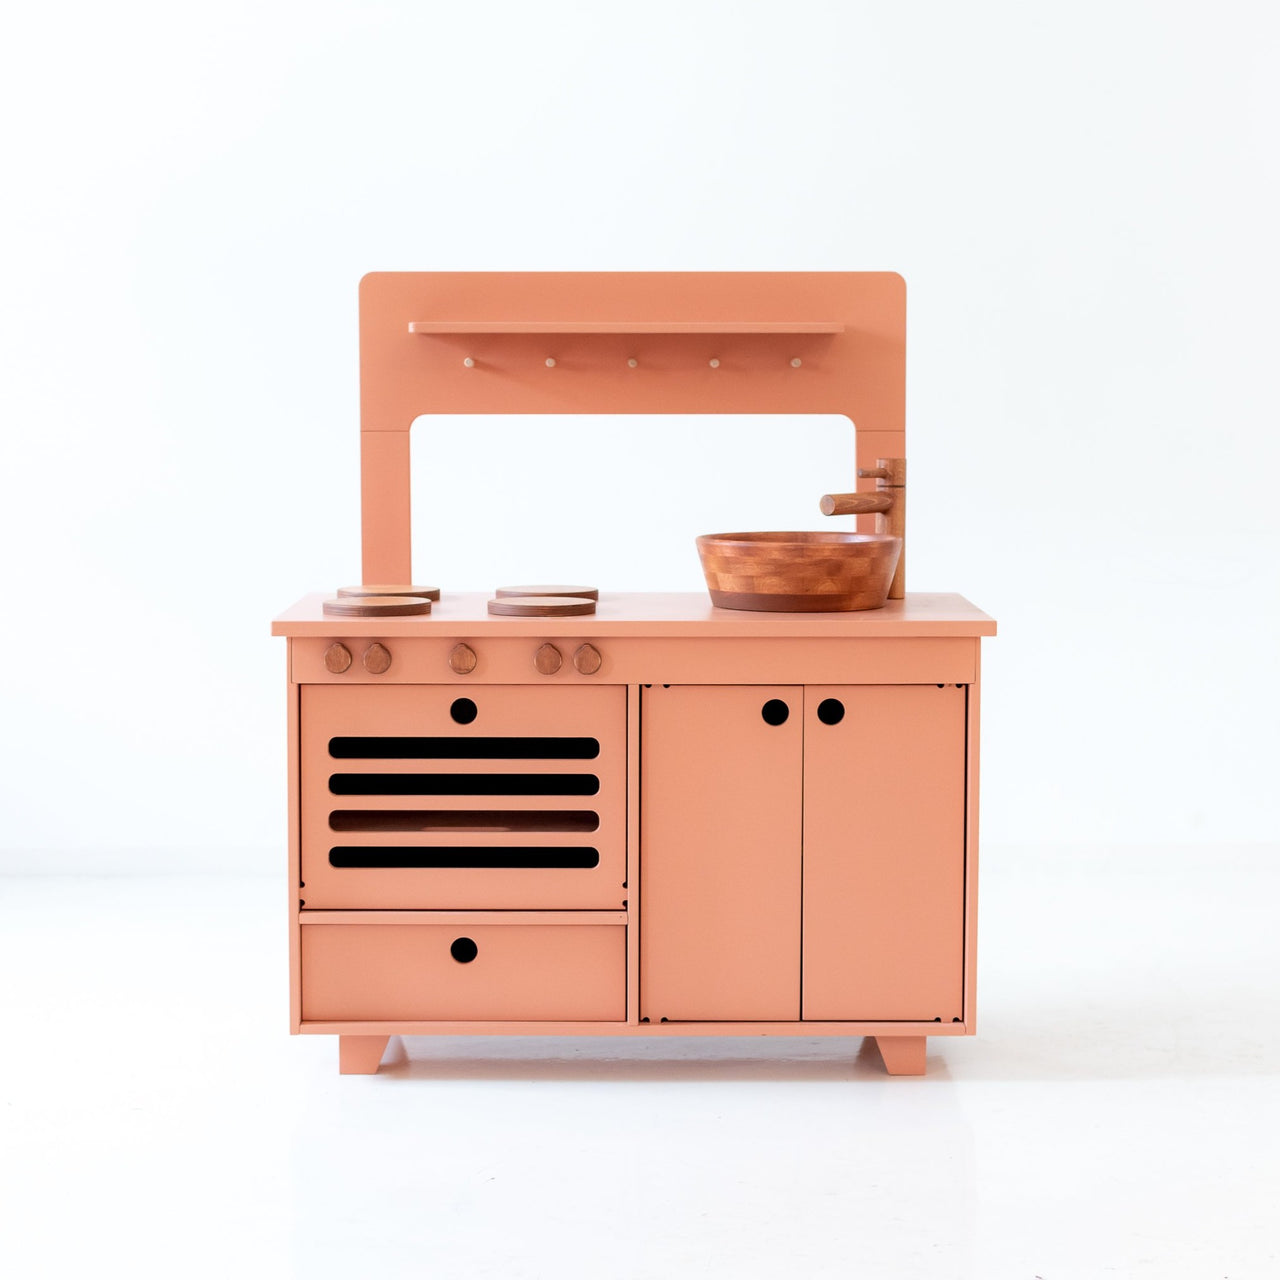 Handcrafted Wooden Play Kitchen - Dusty Pink - MIDMINI - Plywood Furniture